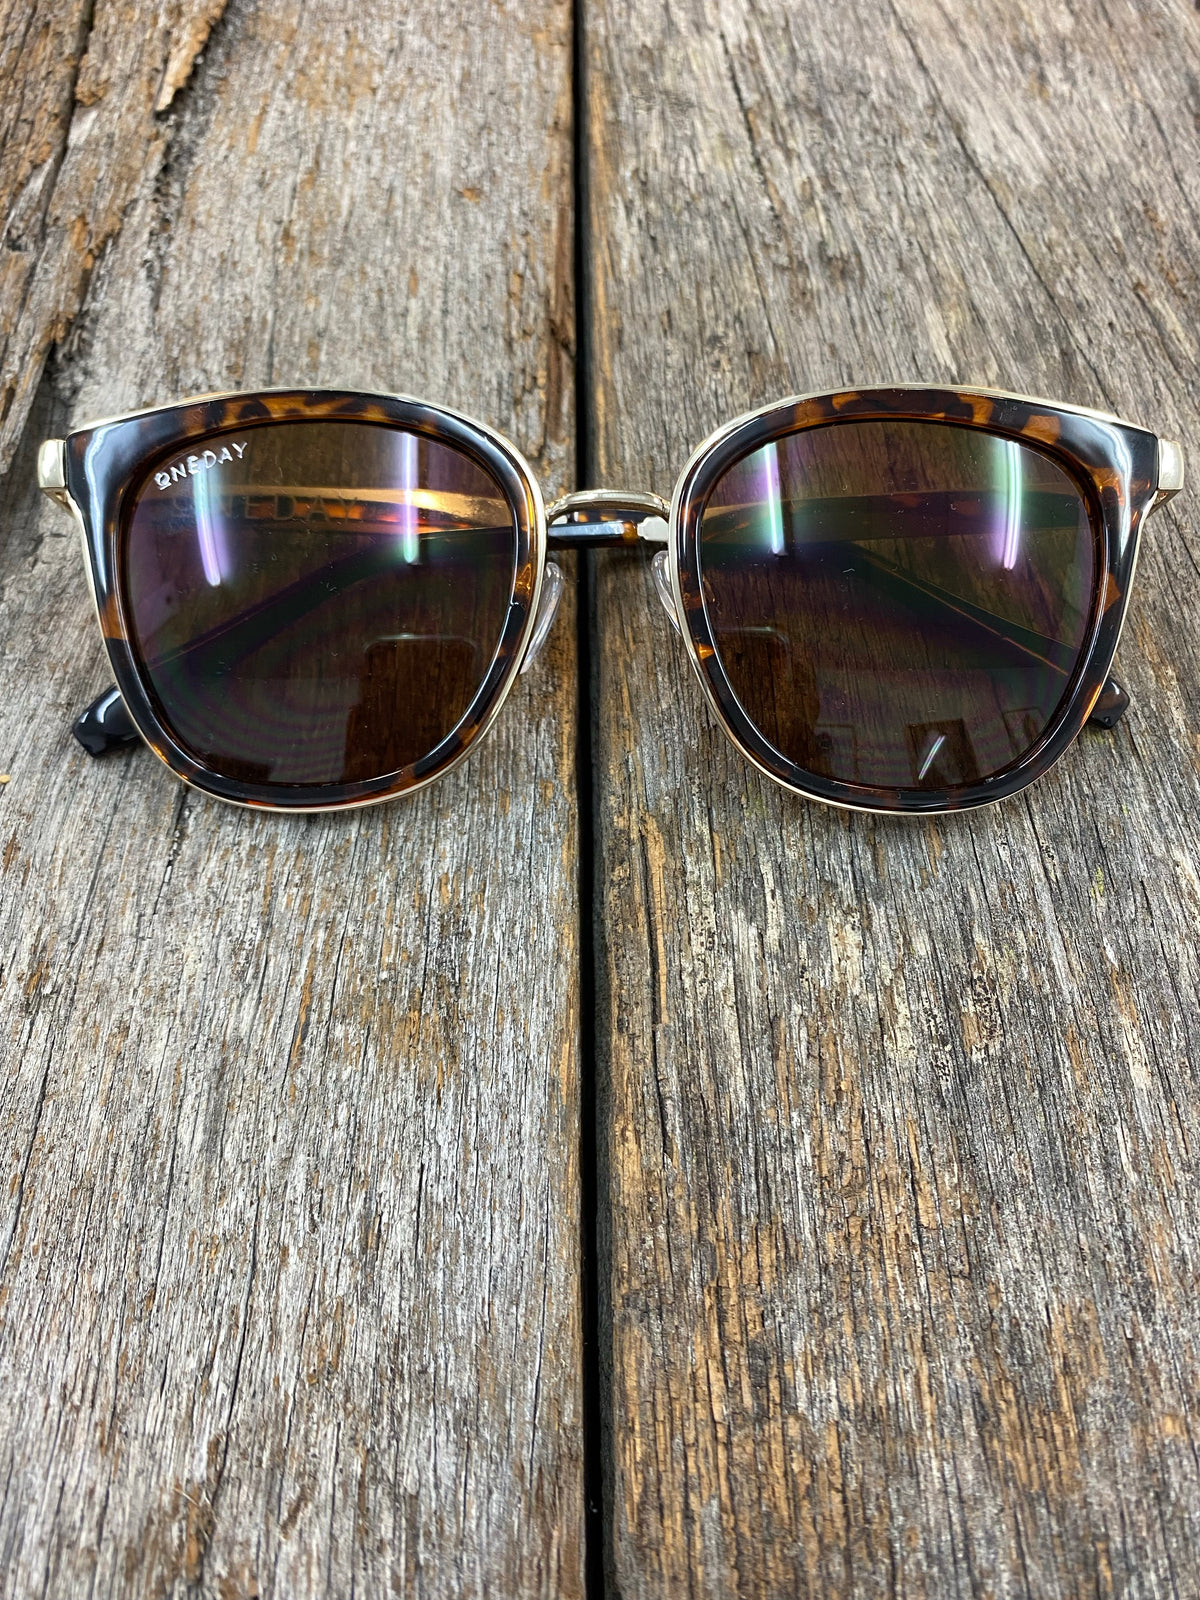 Jet Setter Sunglasses - Tort and Brown